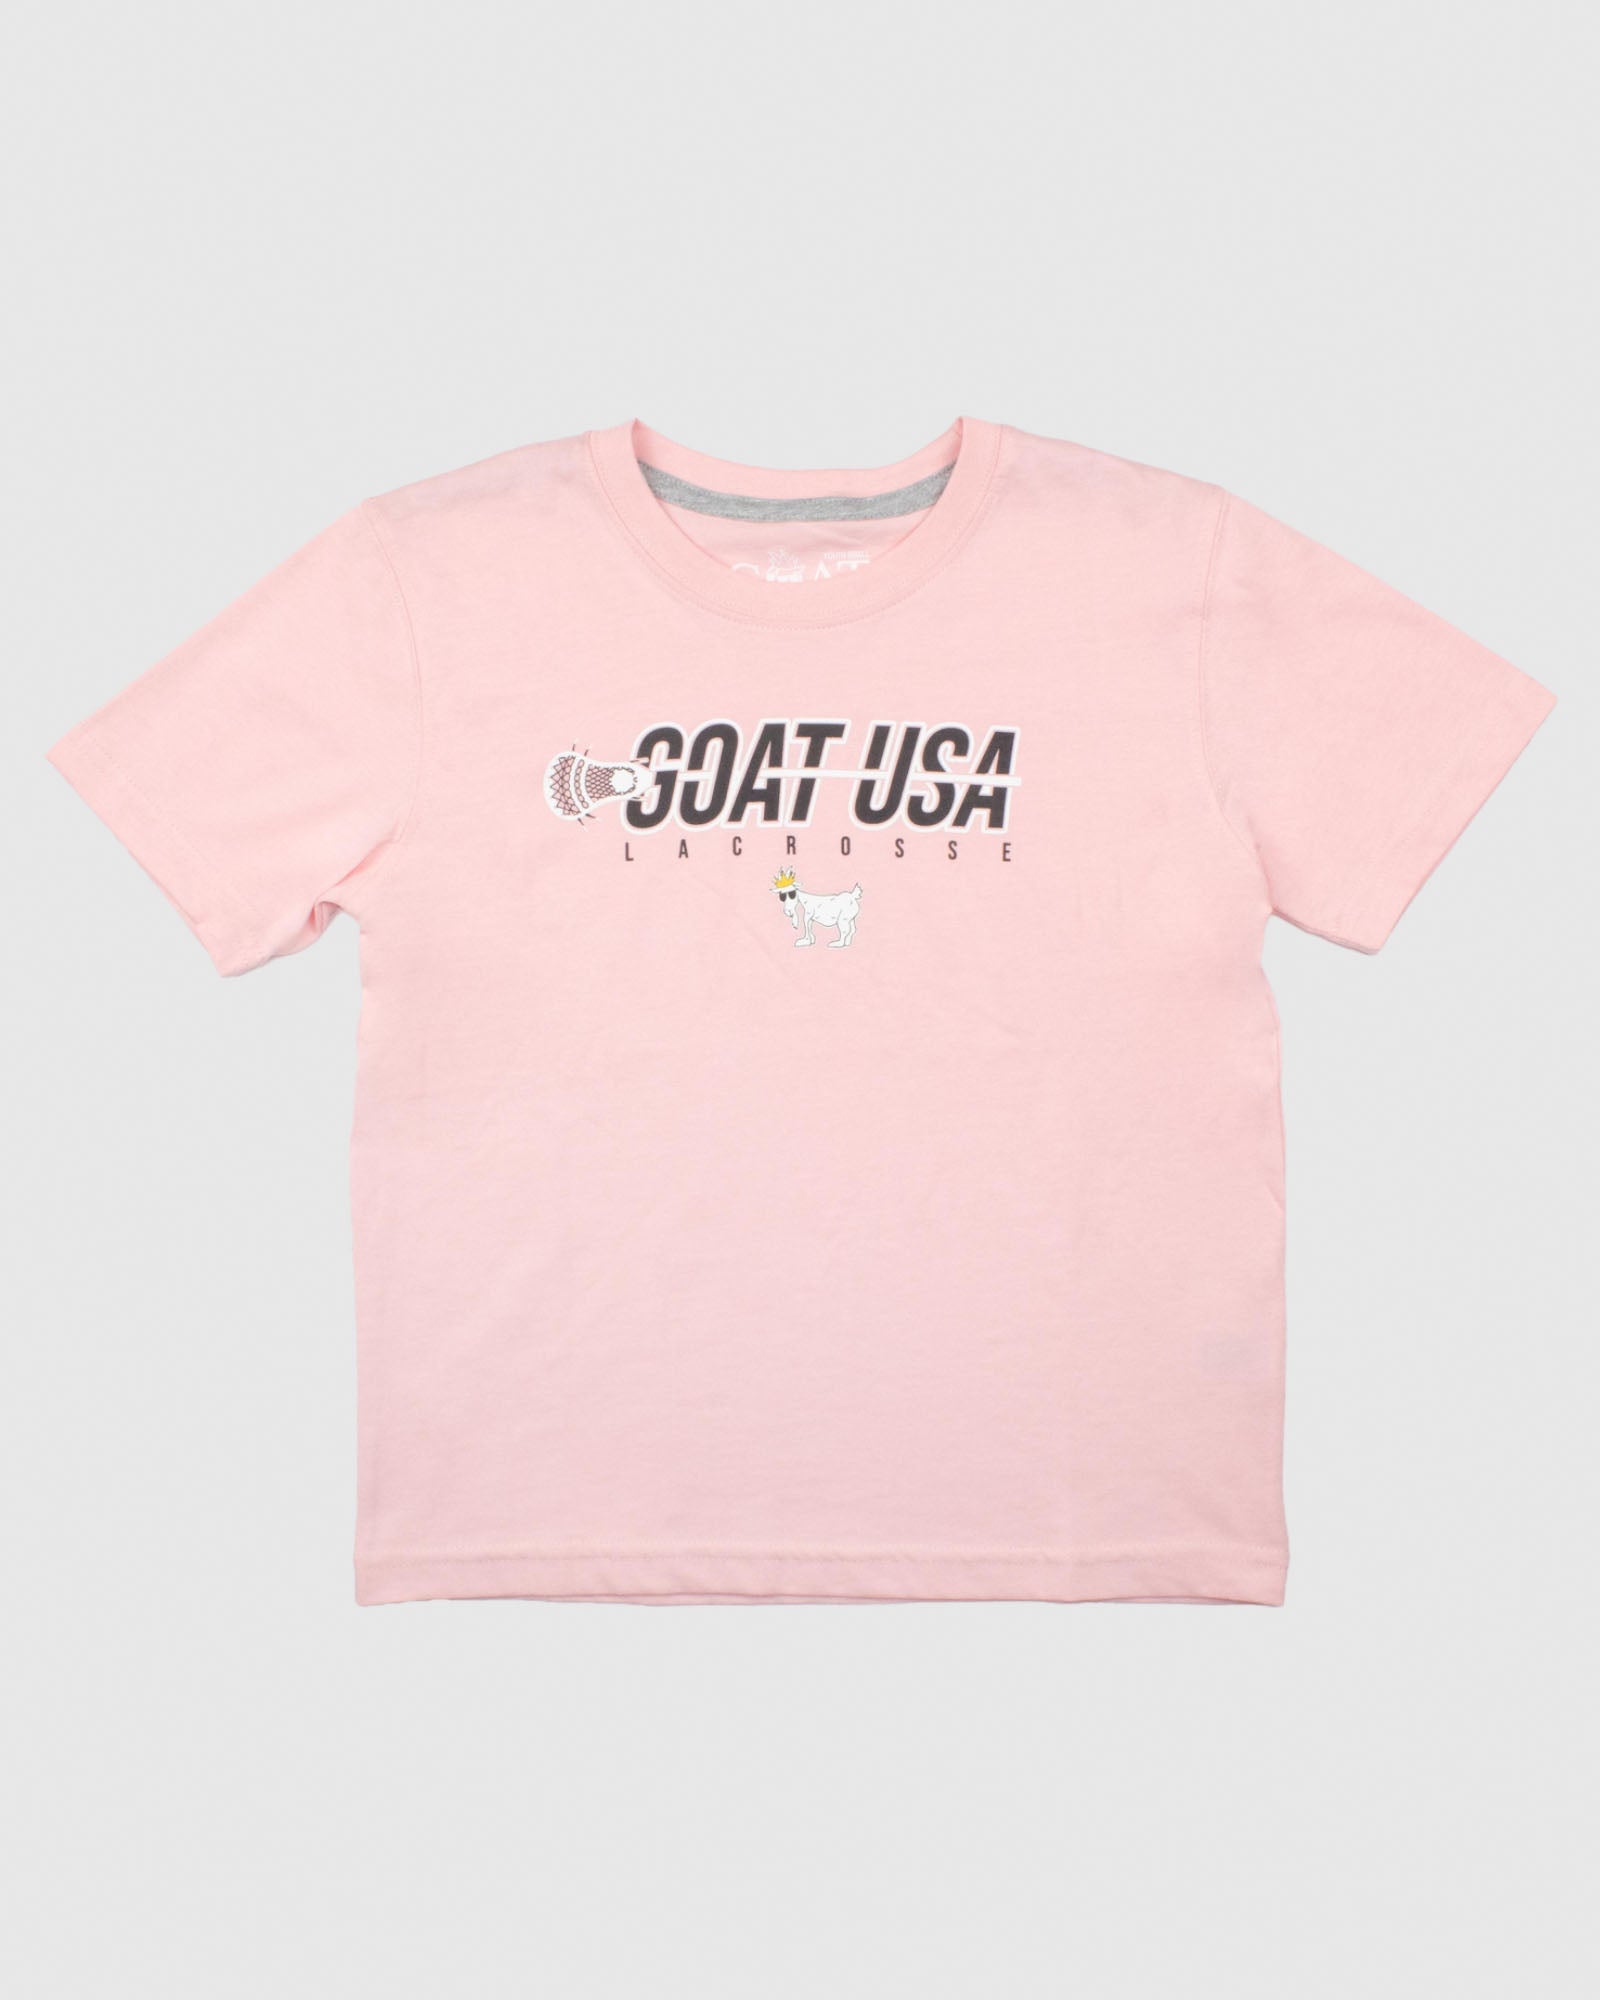 Goat USA Youth Showtime Lacrosse T-Shirt Apparel Goat USA Pink Youth Small 